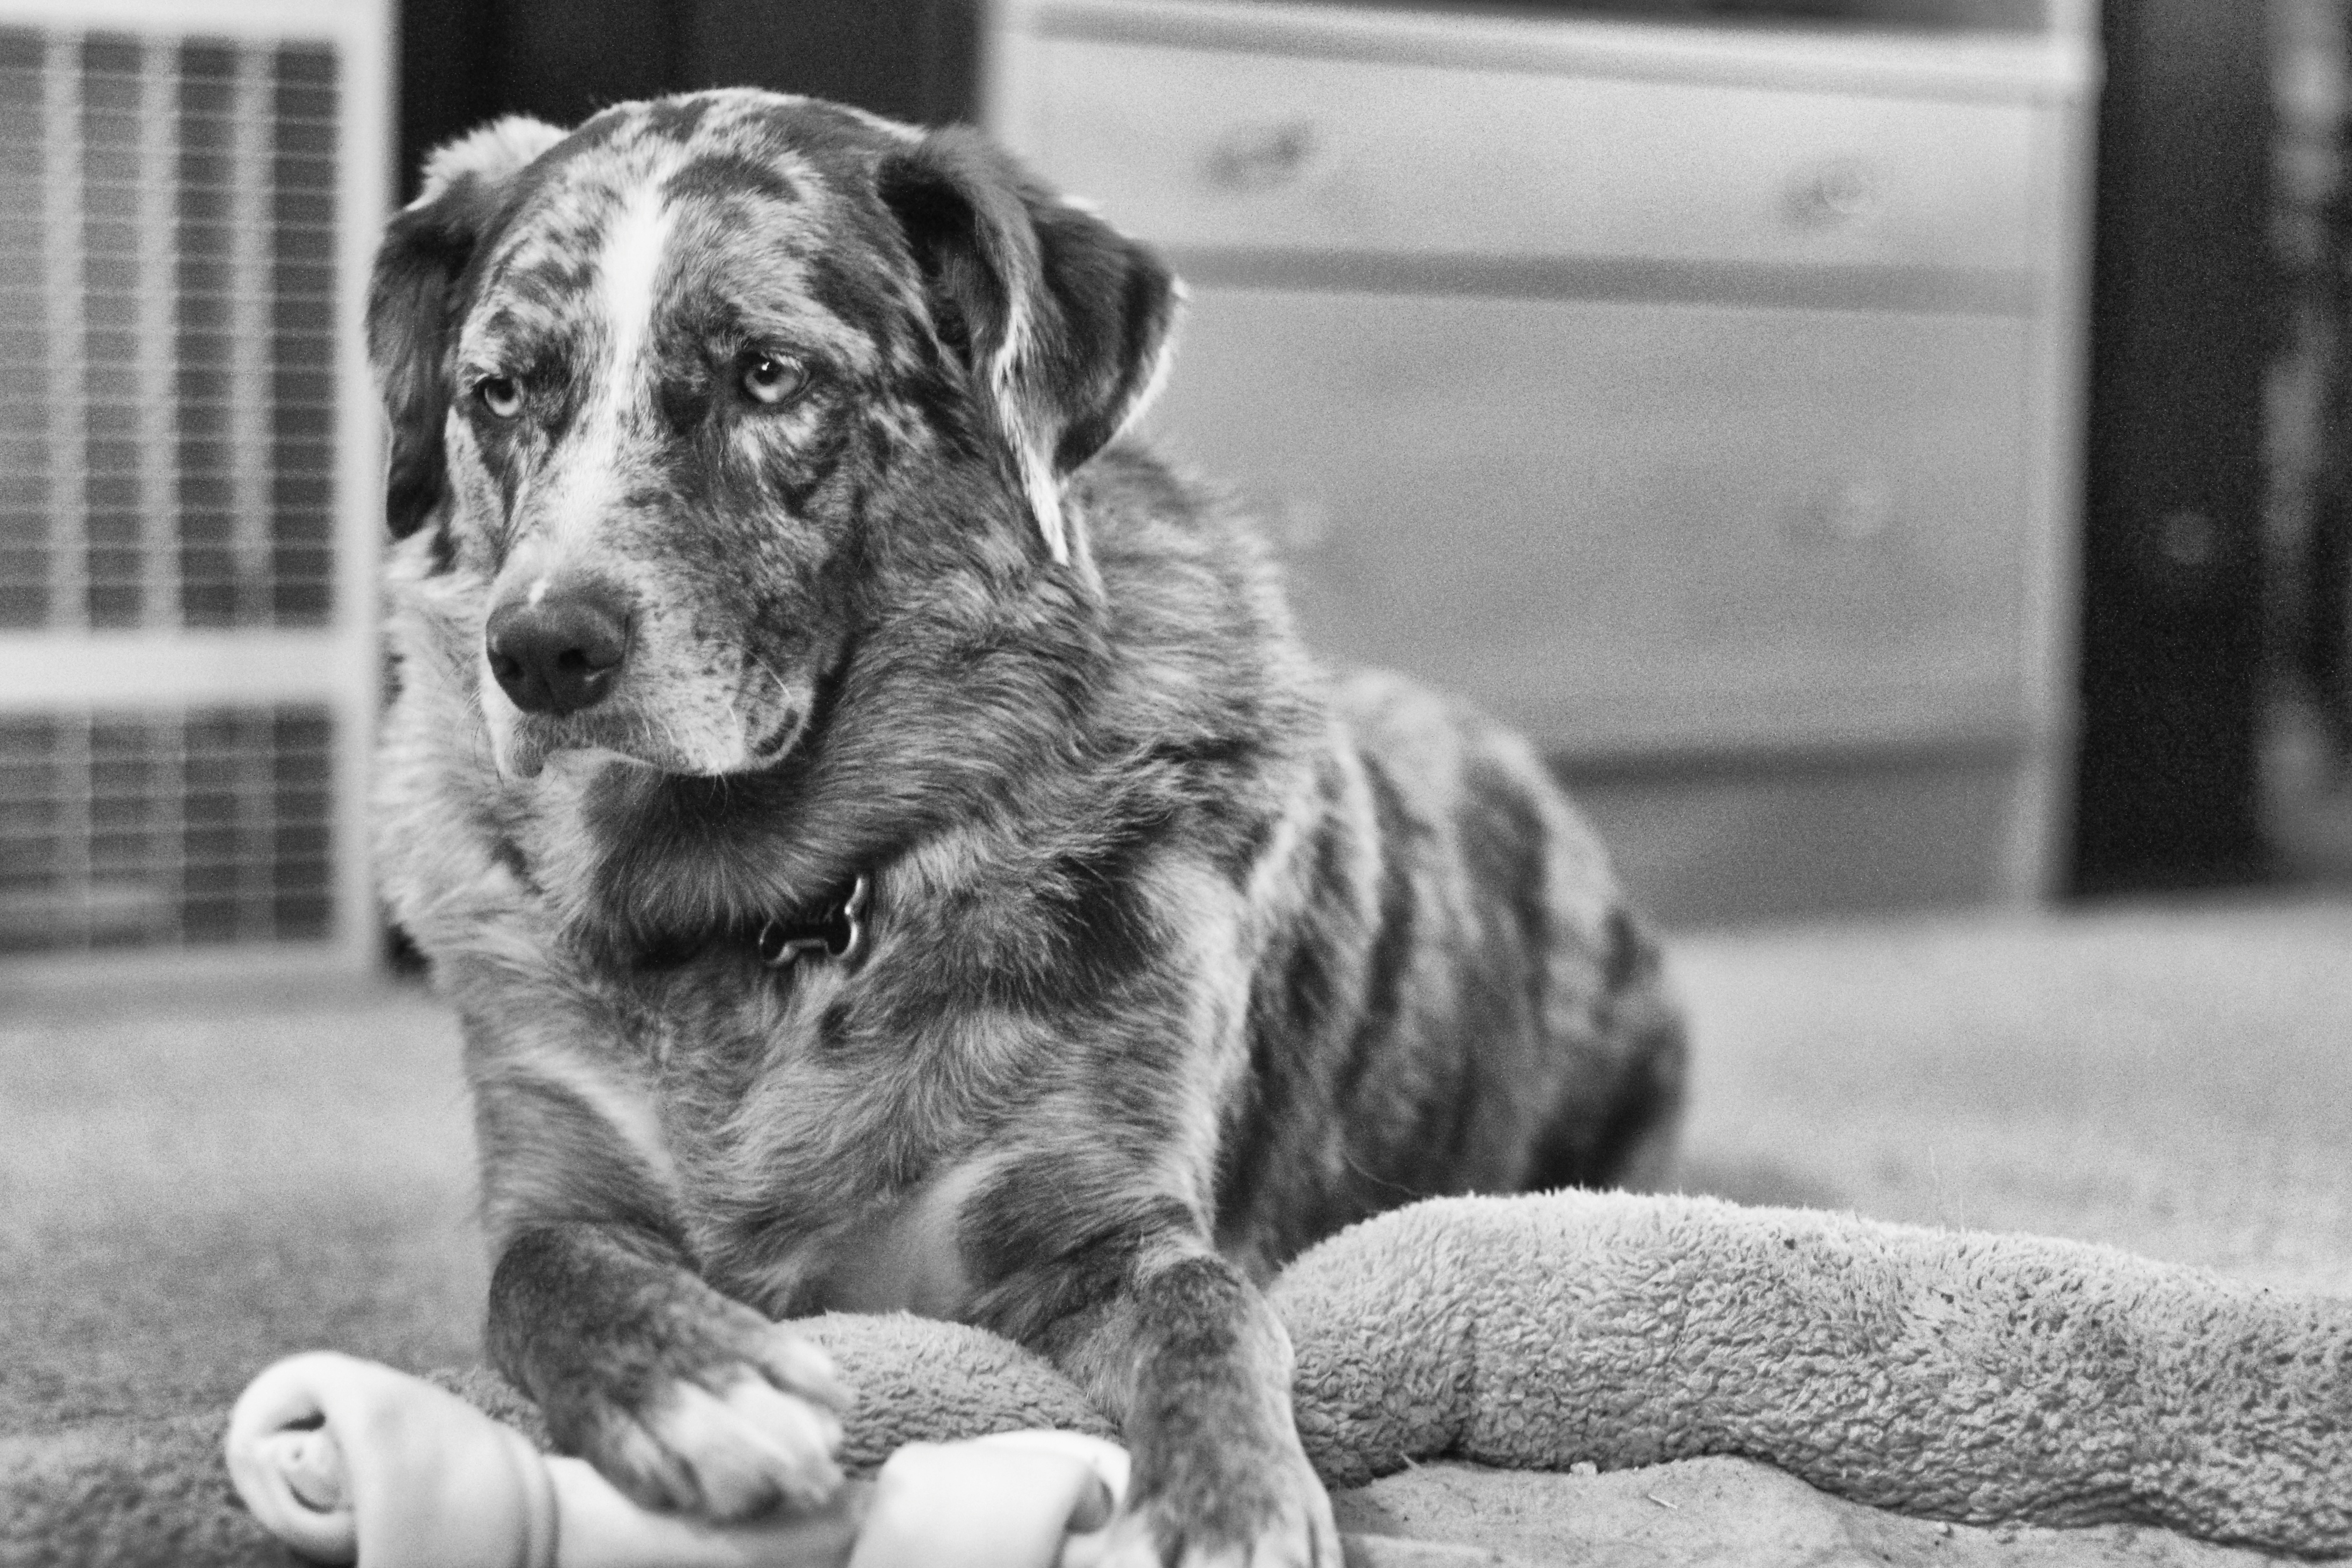 This is My Concerned About The World Look, Animal, Bear, B&w, Dog, HQ Photo